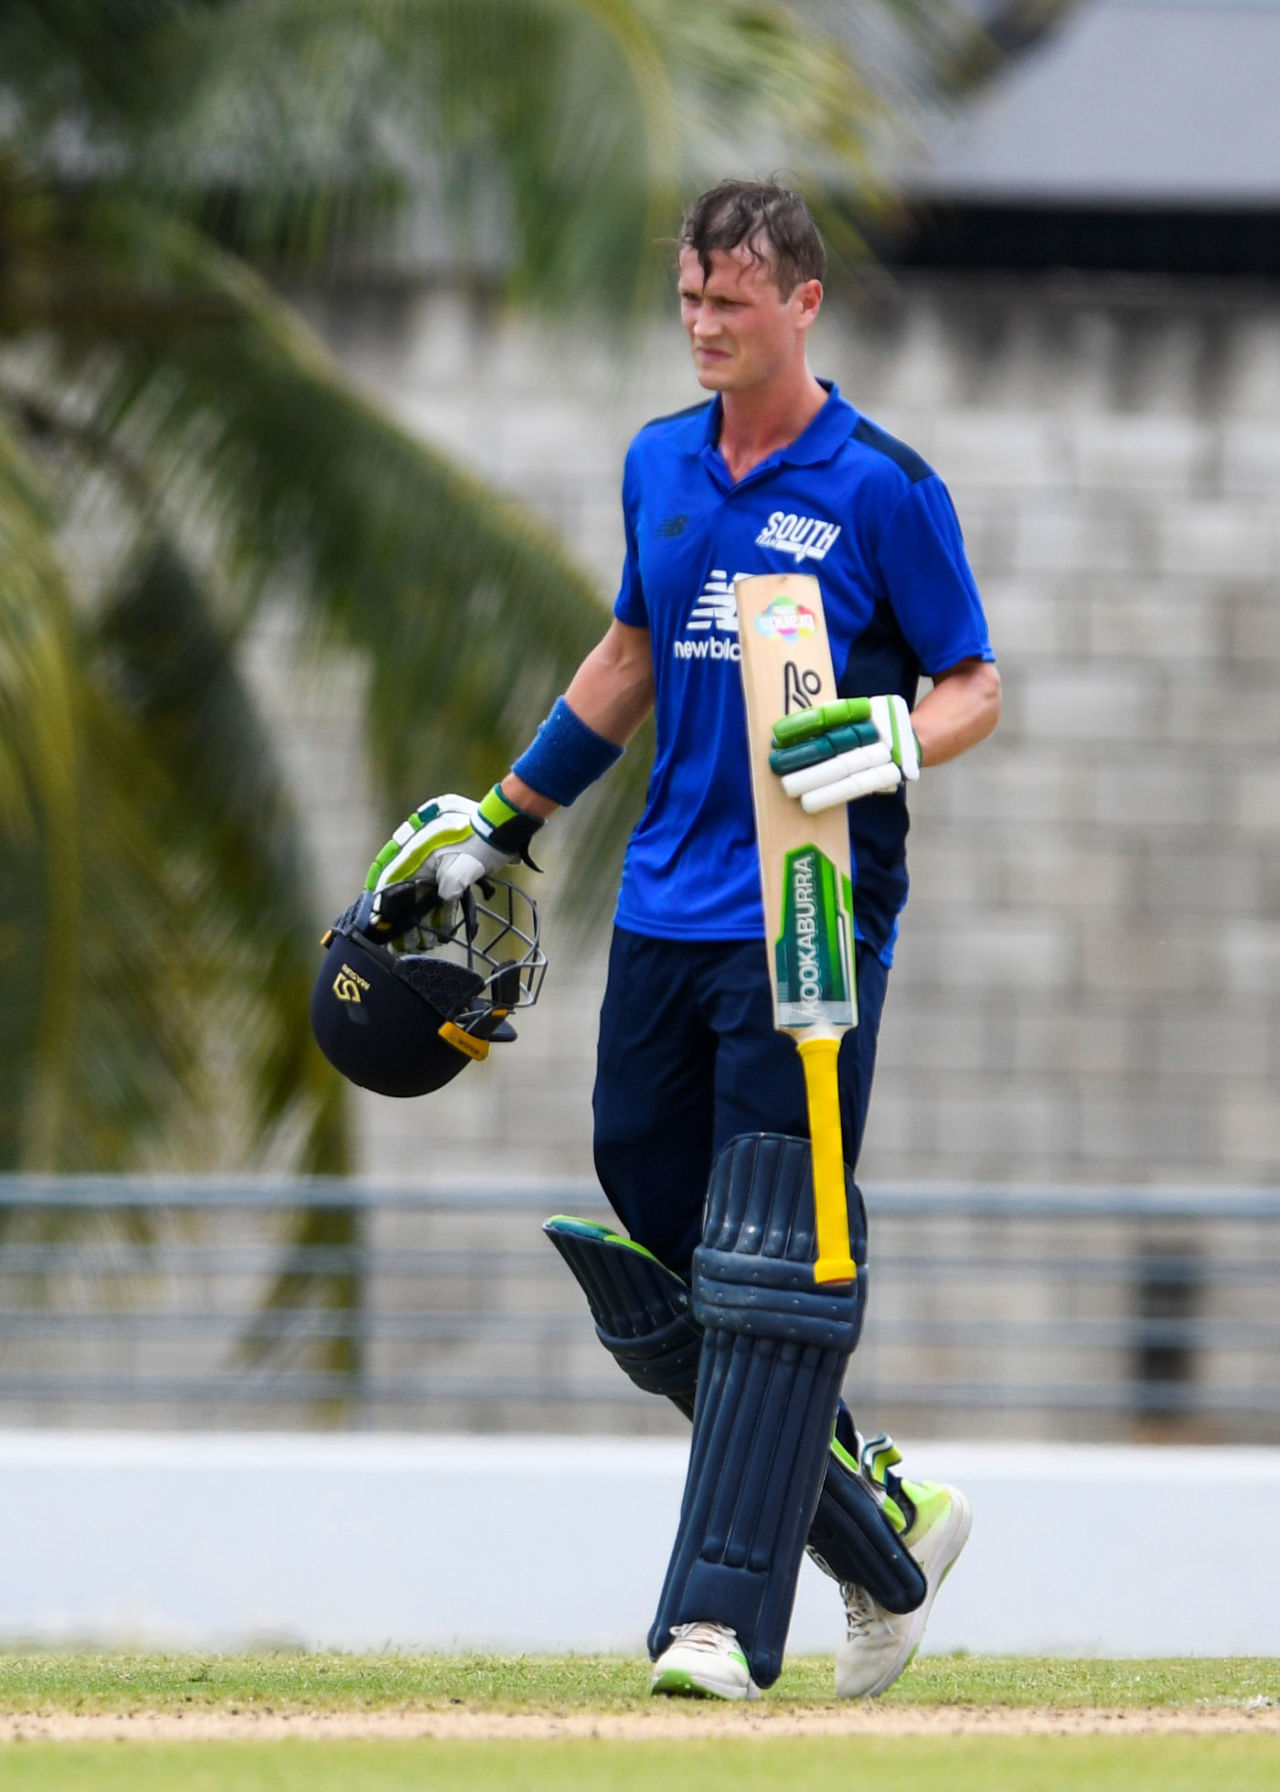 Nick Gubbins heaped on more agony for North - and for himself - as his century was completed with cramp, North v South, Kensington Oval, Barbados, March 18, 2018